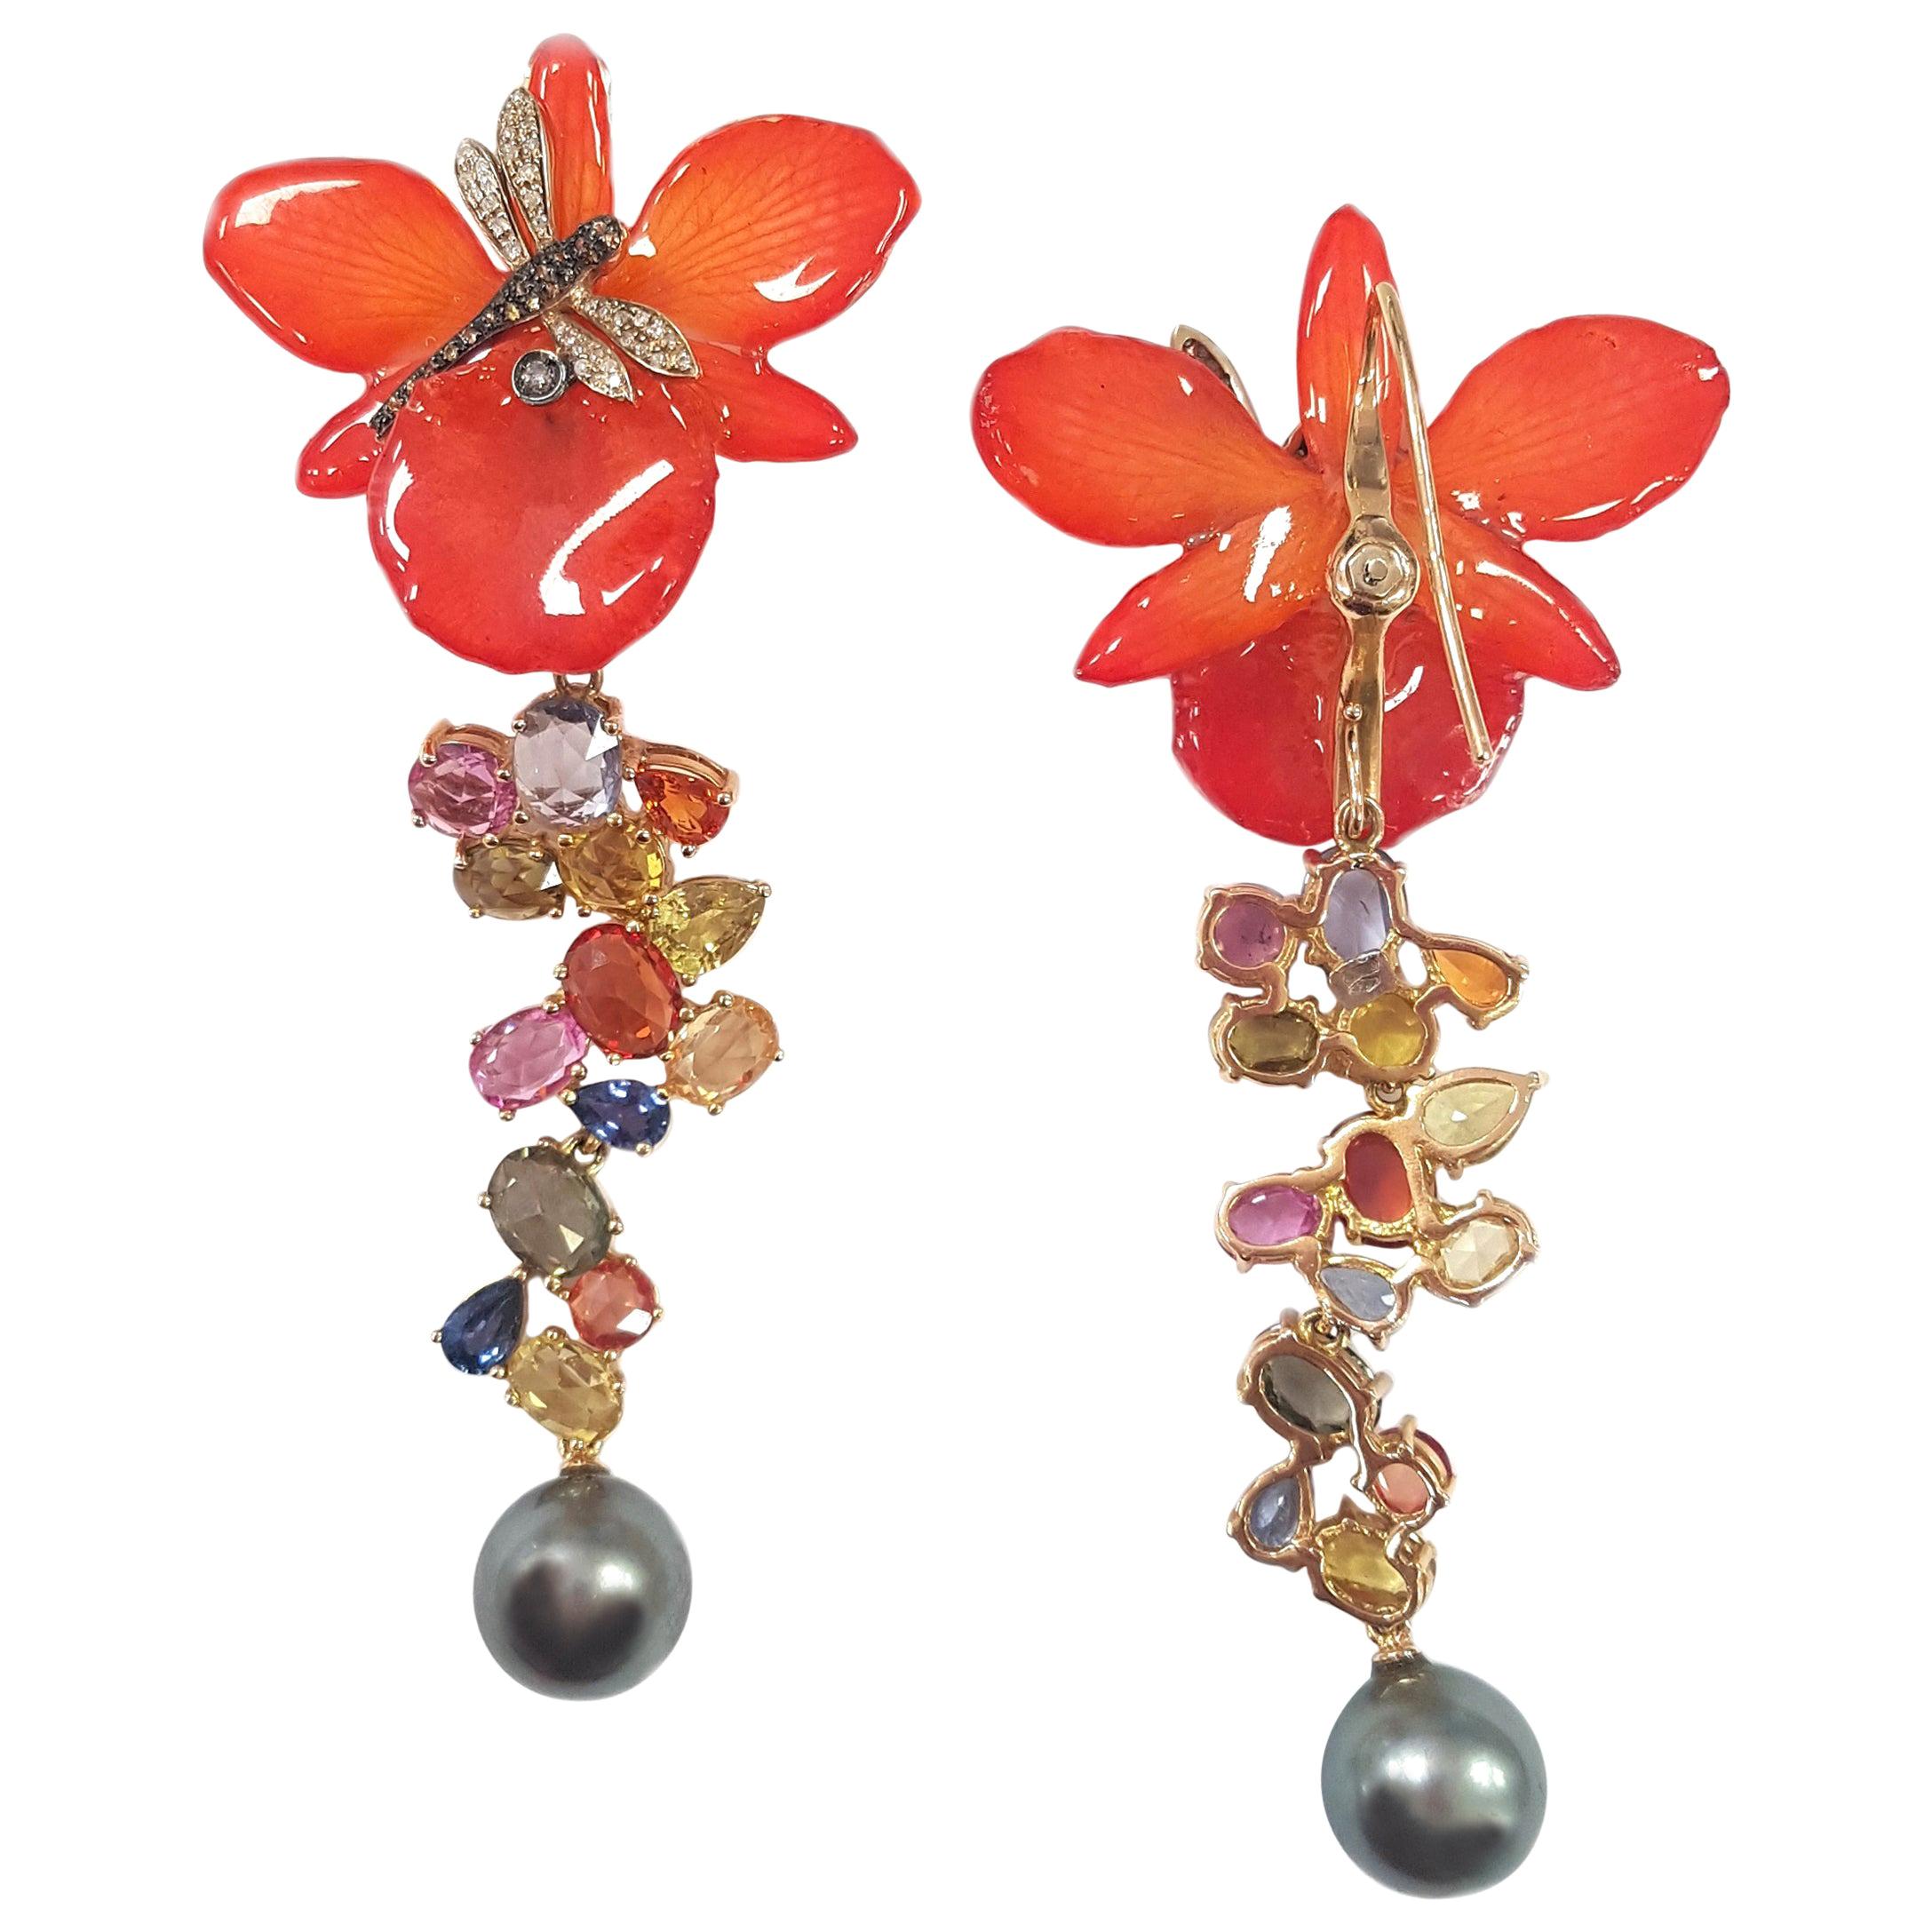 Multiple pairs of earrings in one! These convertible dragonfly and real orchid drop earrings in pearl, sapphire, diamond and 18-karat yellow gold have been masterfully created by hand. They also easily transform into a second pair, which means they